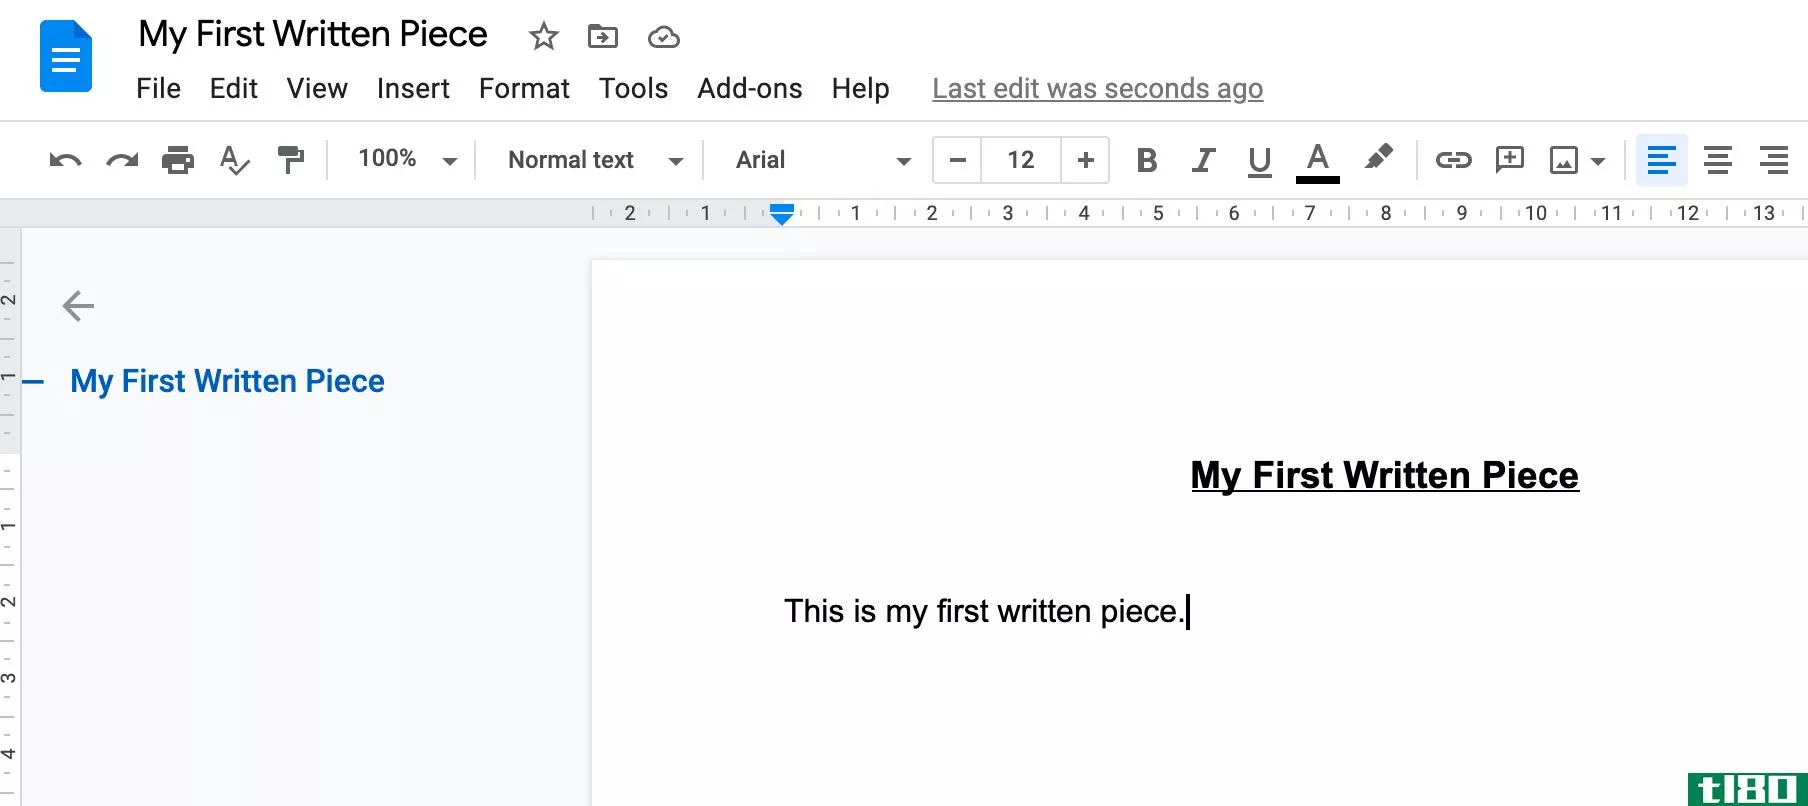 Google Docs new document with the title "My First Written Piece"